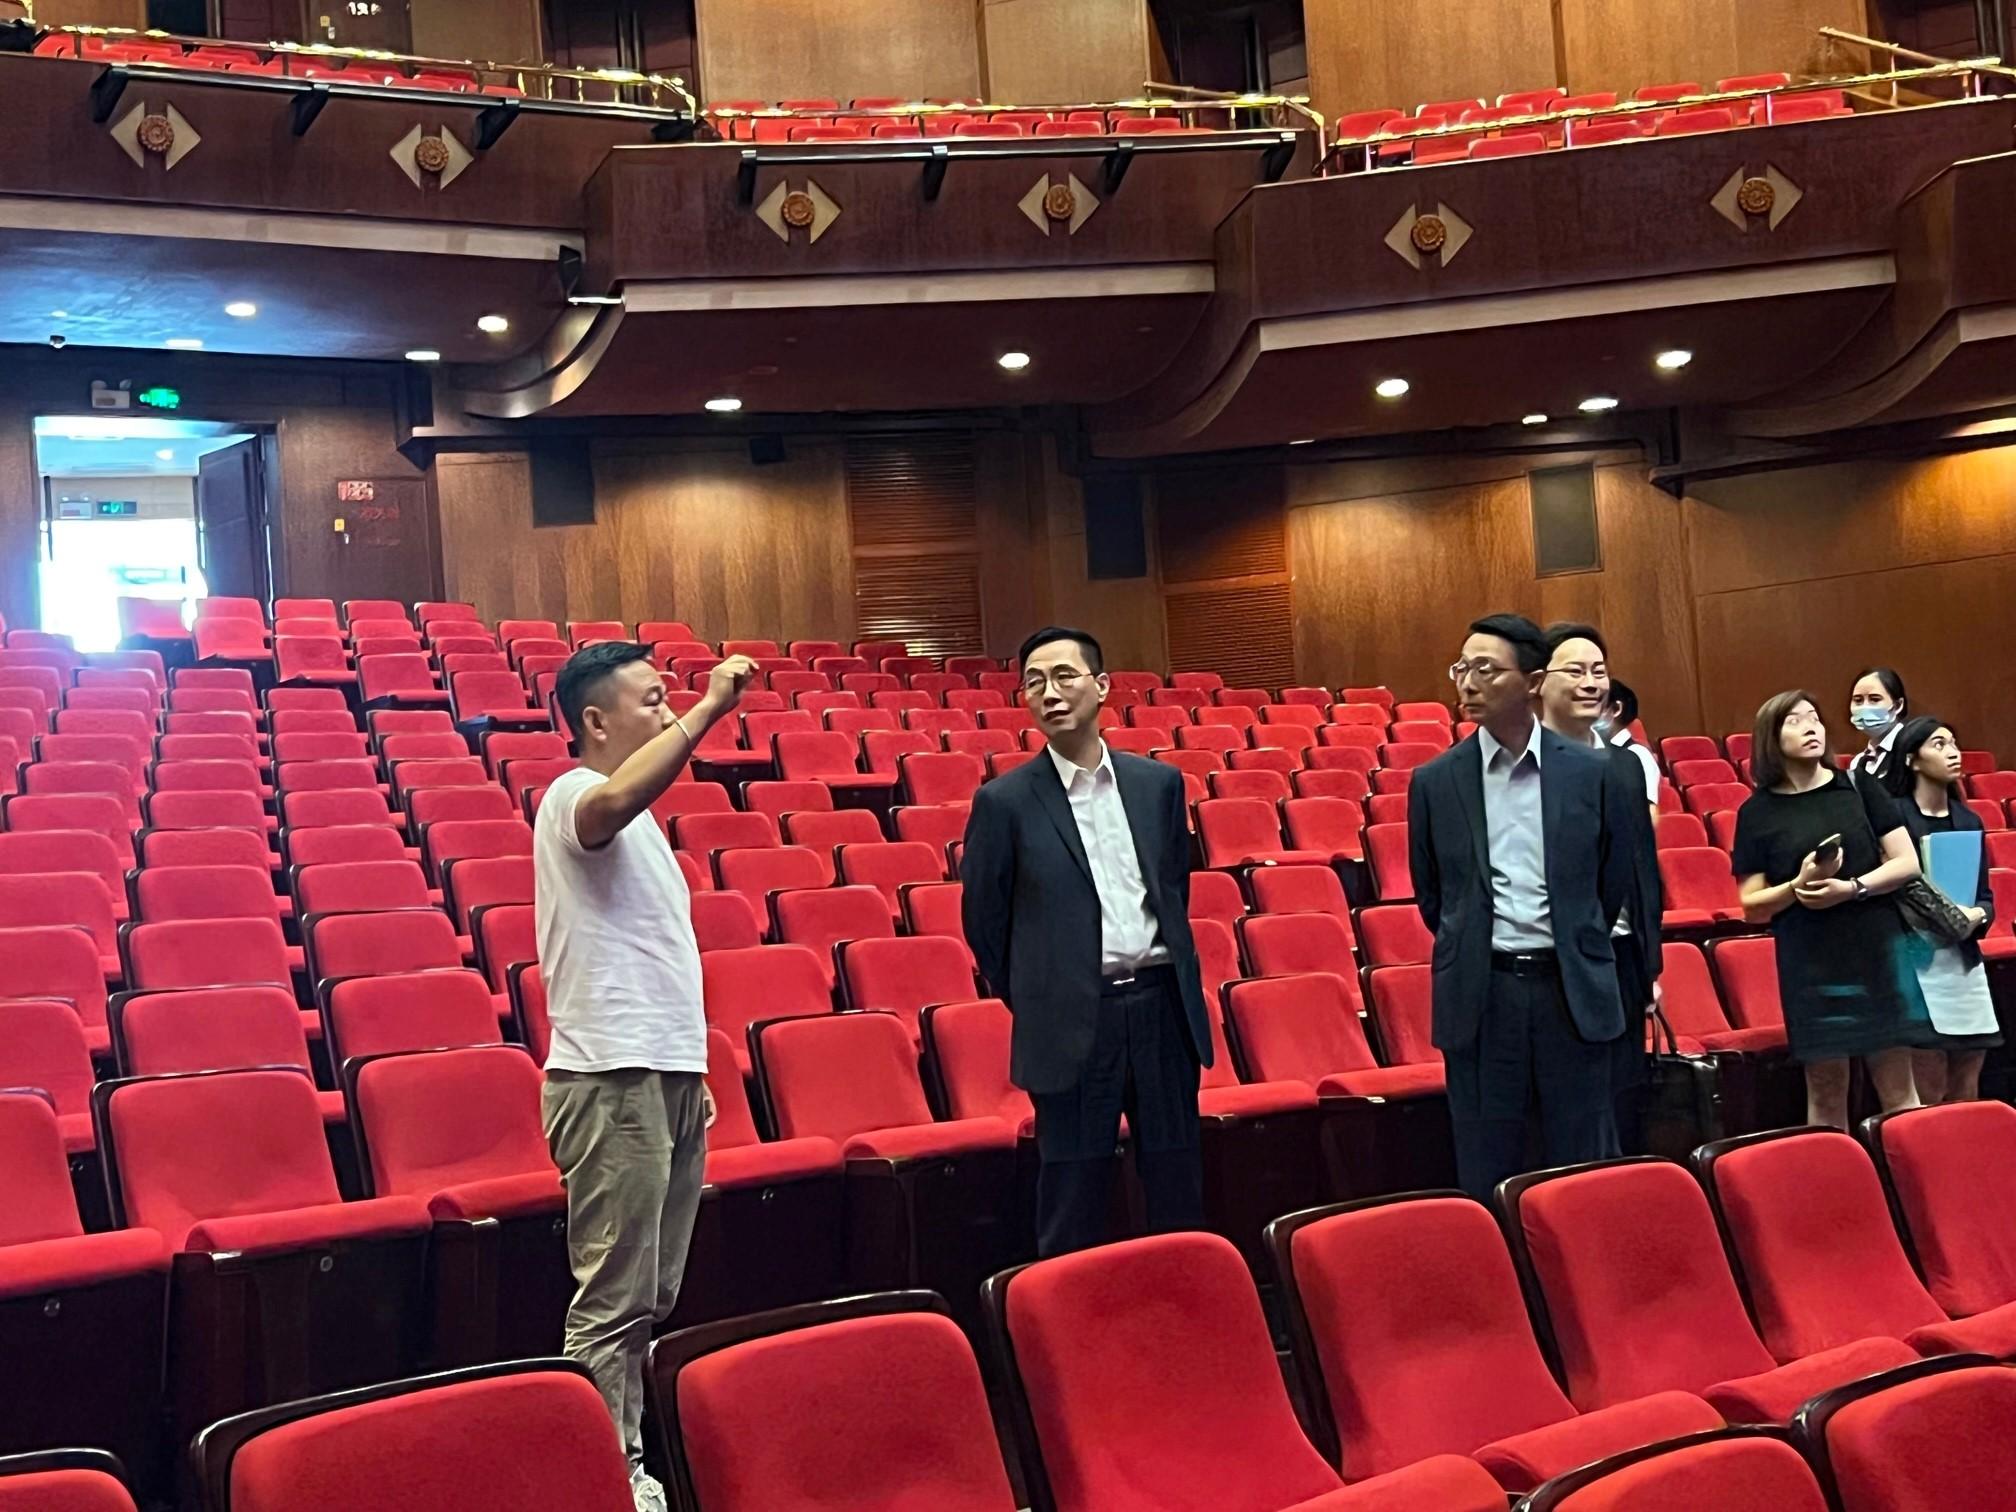 The Secretary for Culture, Sports and Tourism, Mr Kevin Yeung, yesterday (June 26) visited the Zhongshan Culture & Art Center. Photo shows Mr Yeung (second left) and the Director of Leisure and Cultural Services, Mr Vincent Liu, (third left) being briefed by a staff member on the operation of the venue.